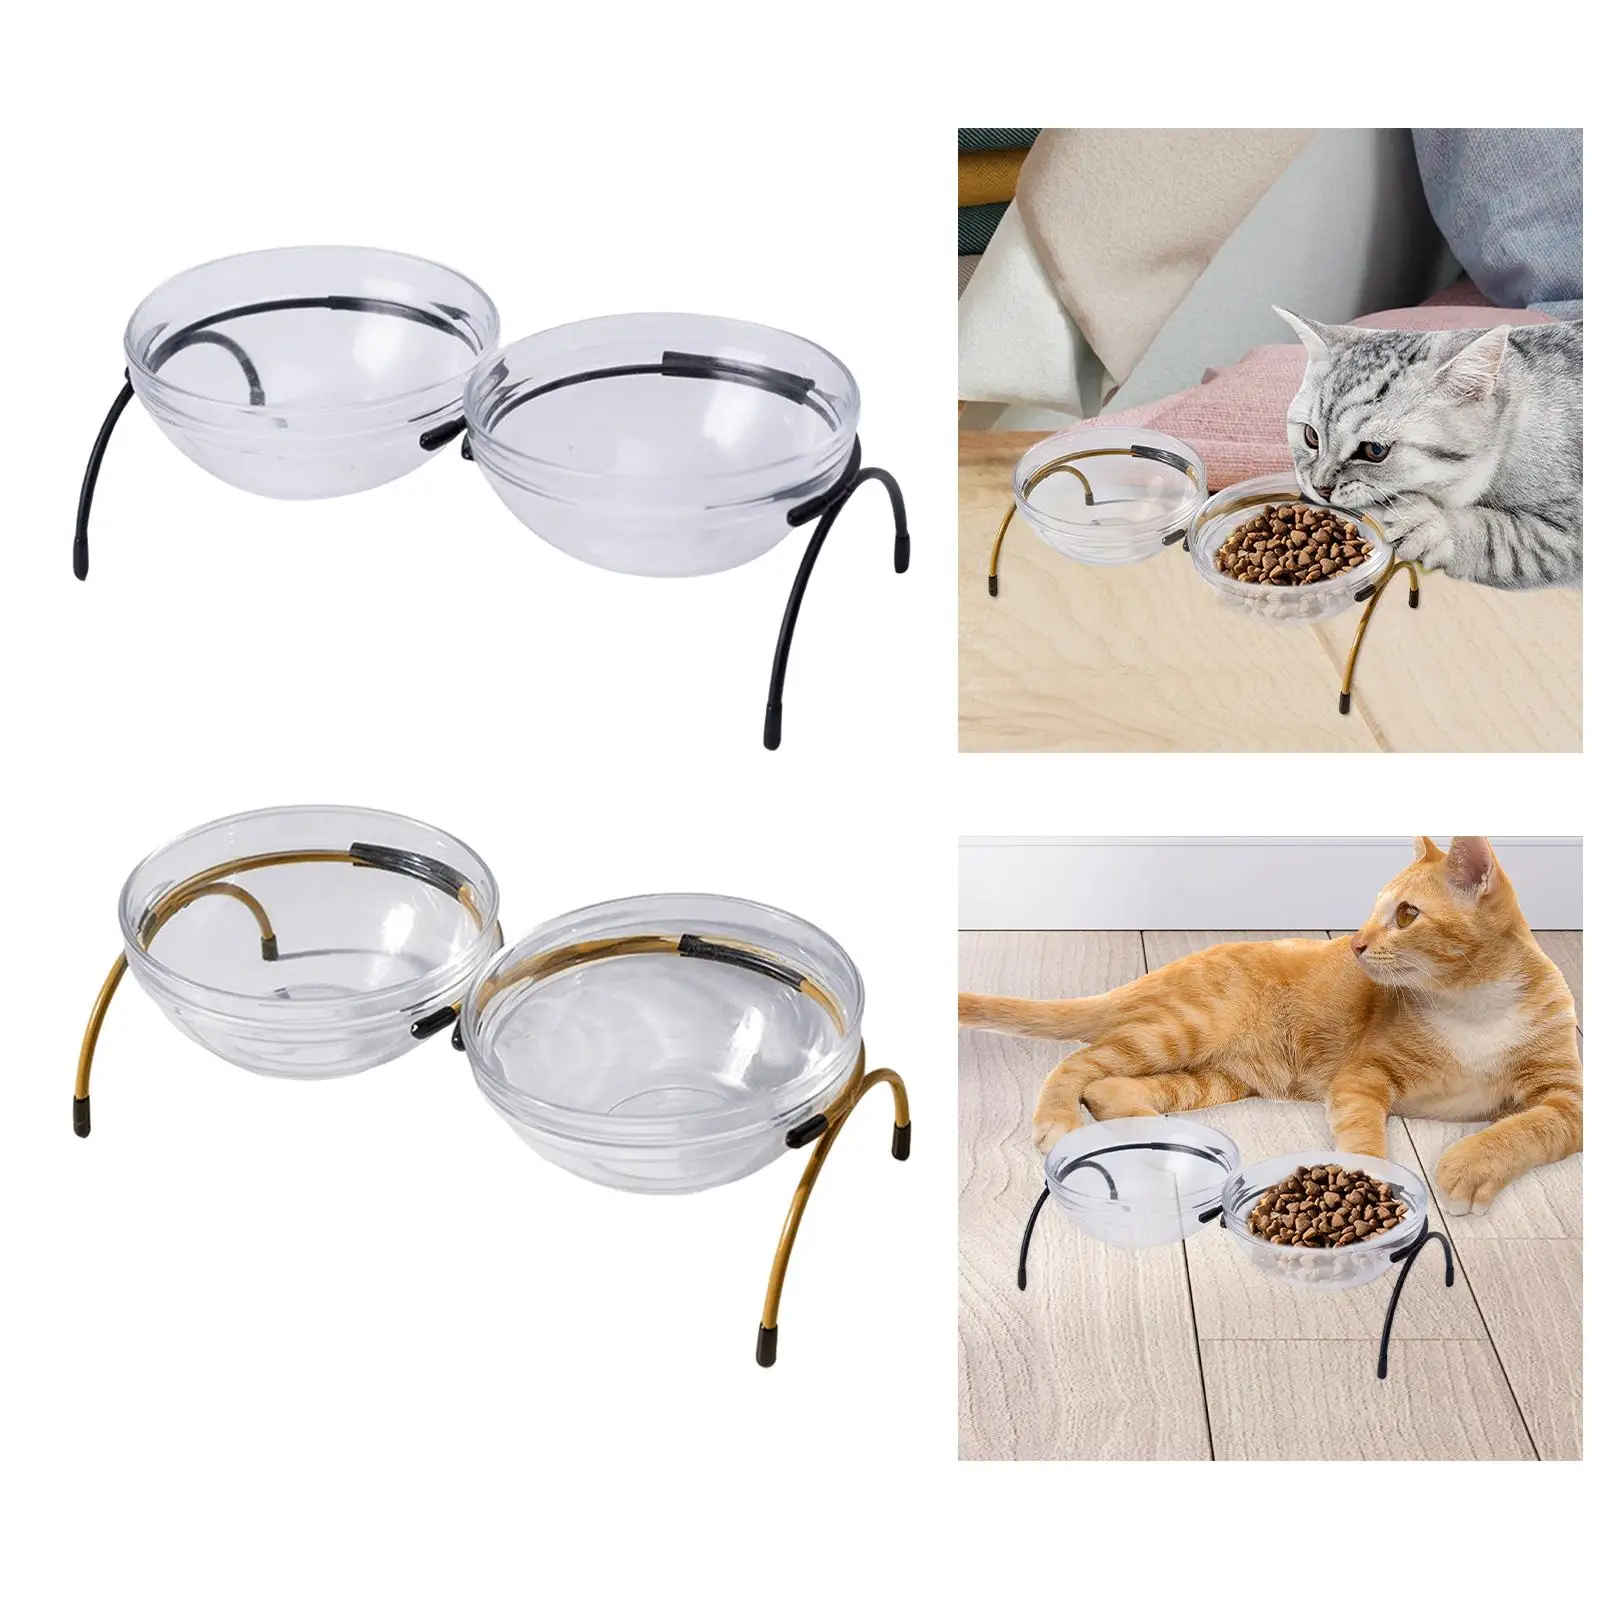 Removable Bowls, Double Glass, Elevated Pet Feeder, Cervical